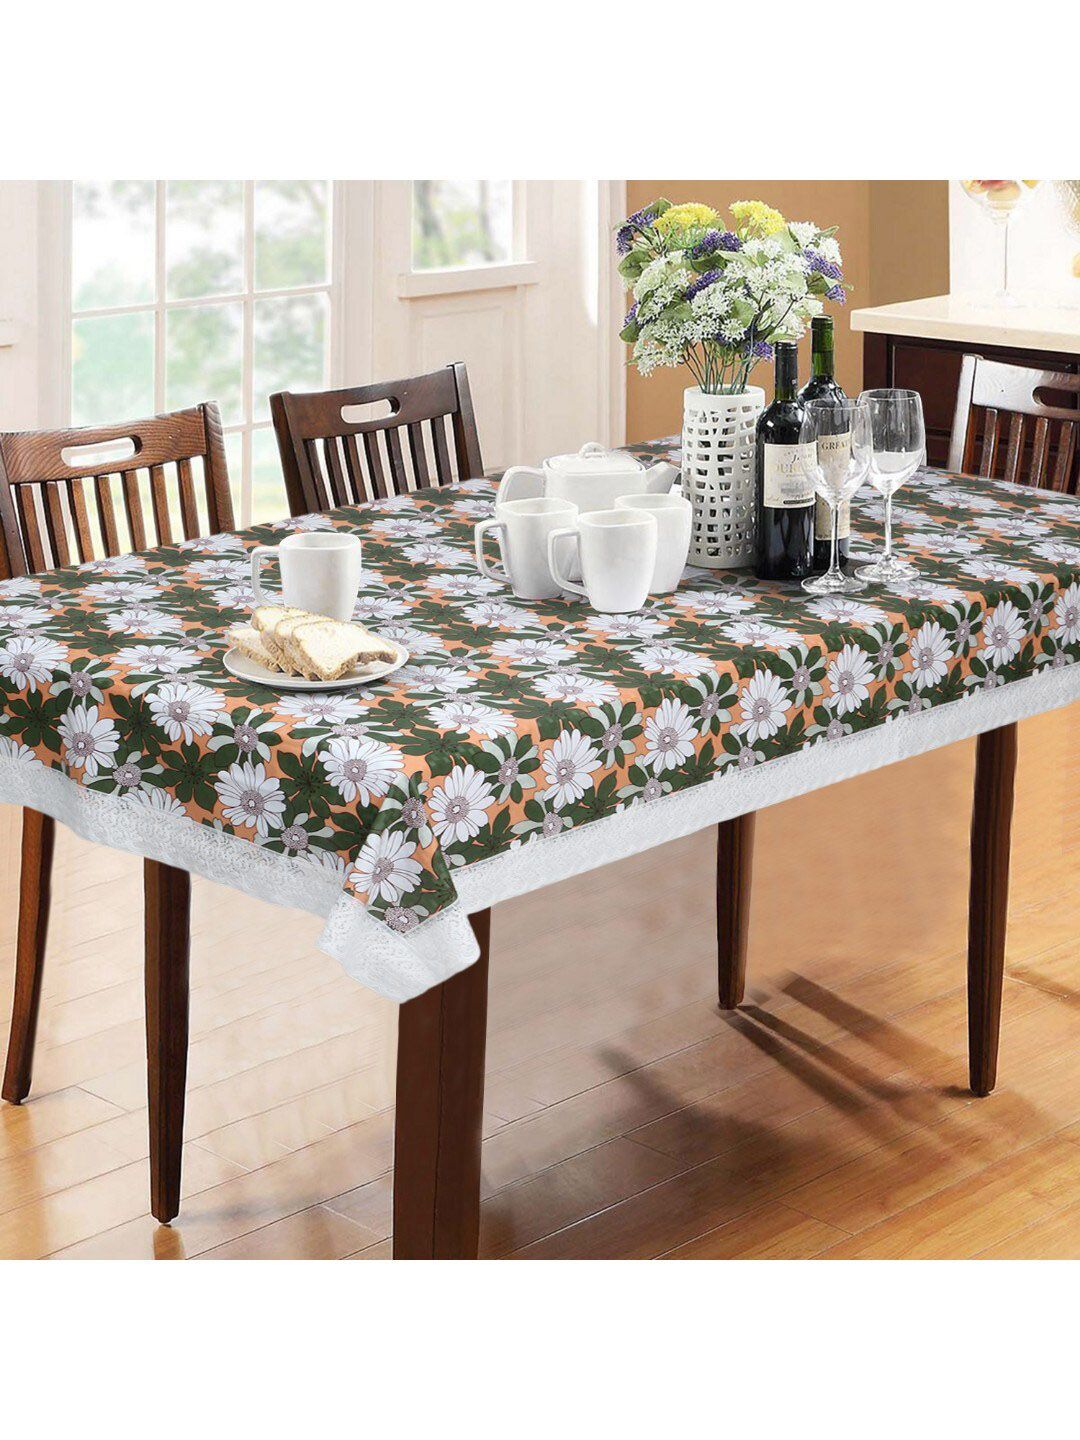 Dakshya Industries Green & White 6 Seater Floral Digital Printed Table Cover Price in India